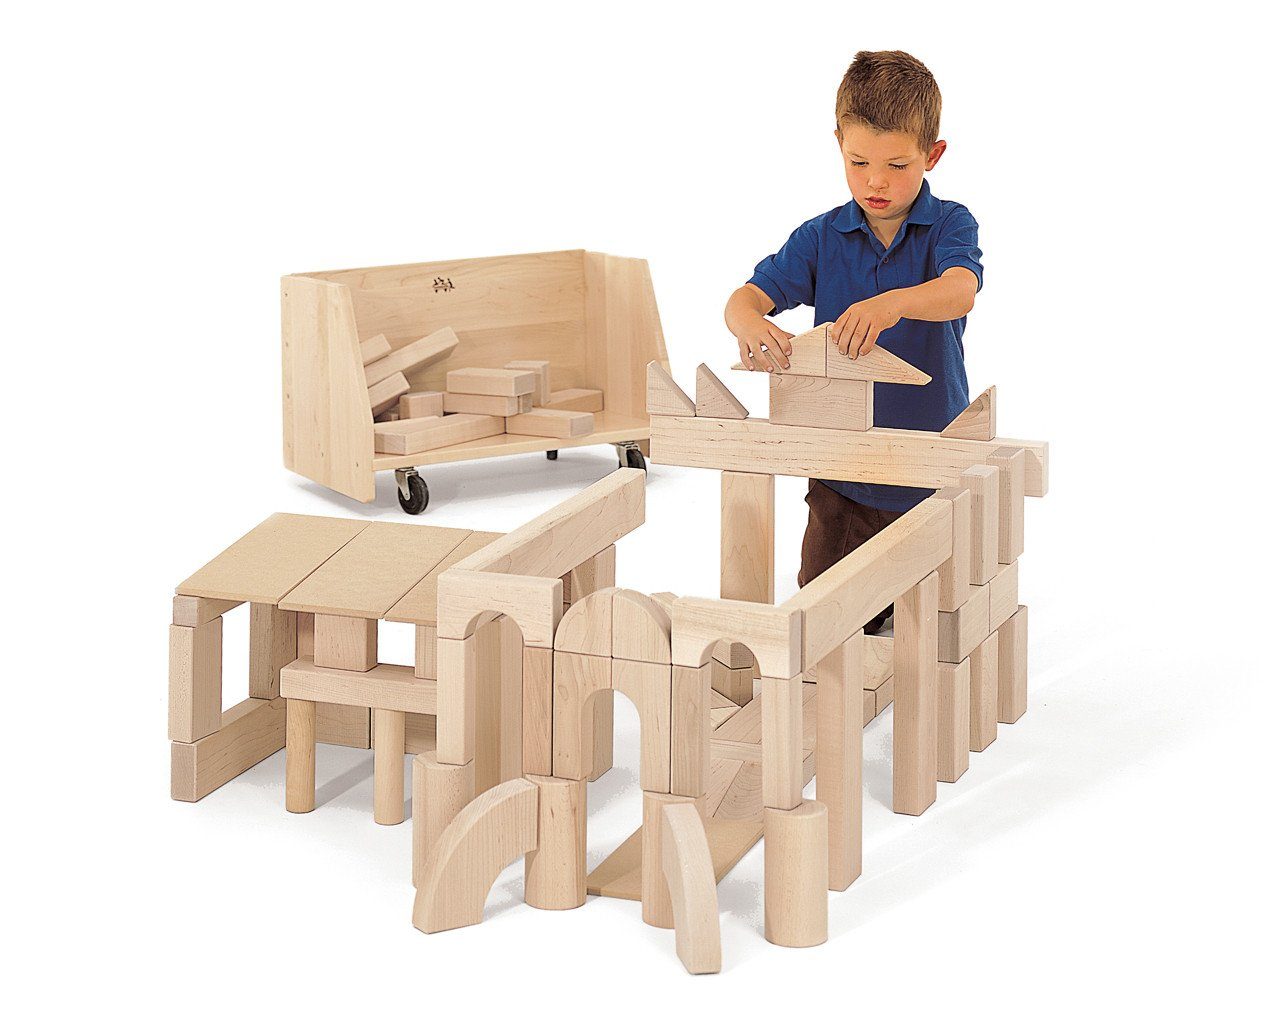 Unit Block Introductory Set and Cart by Community Playthings - louisekool